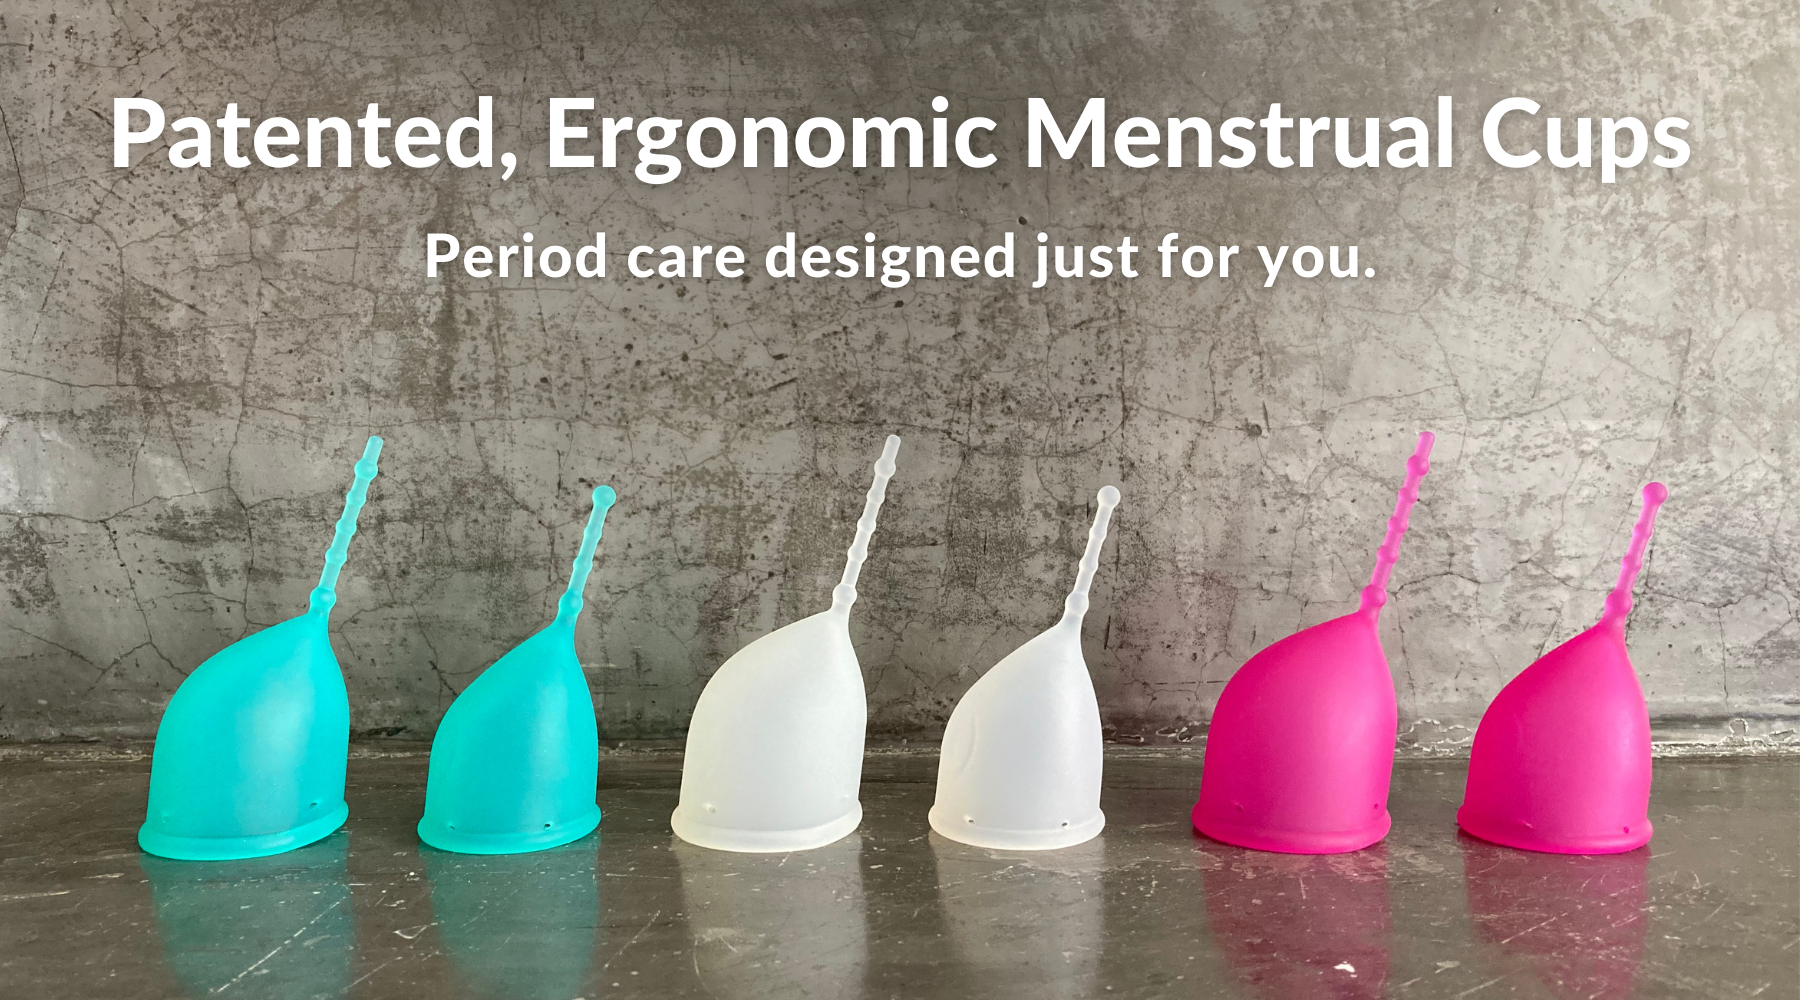 Patented, ergonomic menstrual cups. Period care designed just for you. Photo of Kind Cup menstrual cups full product lineup shown in profile against a dark gray cement background.